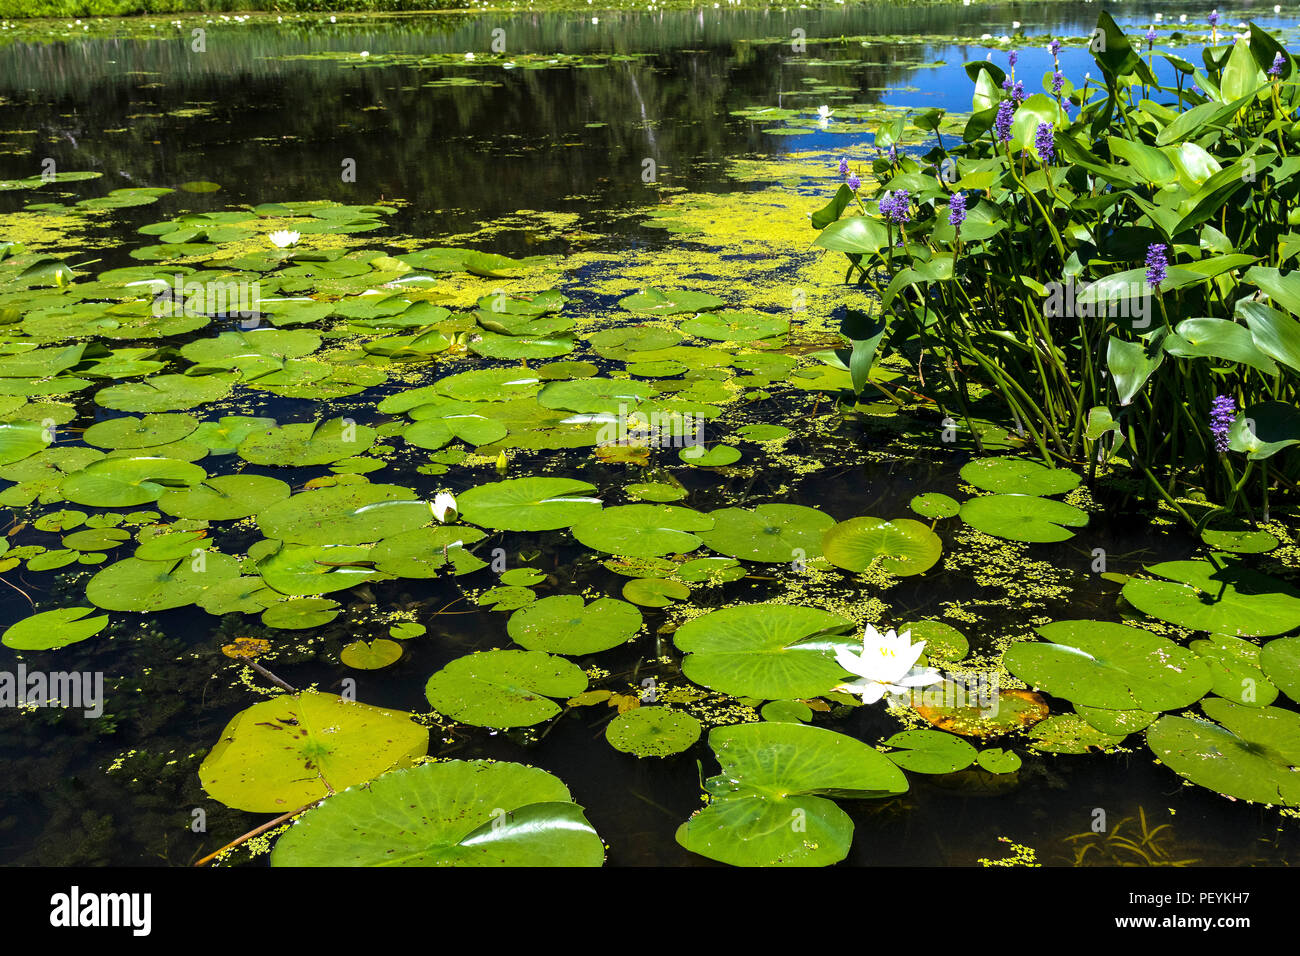 Nature around Lac Boivin in Granby, Eastern Townships, Quebec, Canada. White water lilies abound during summer. Stock Photo